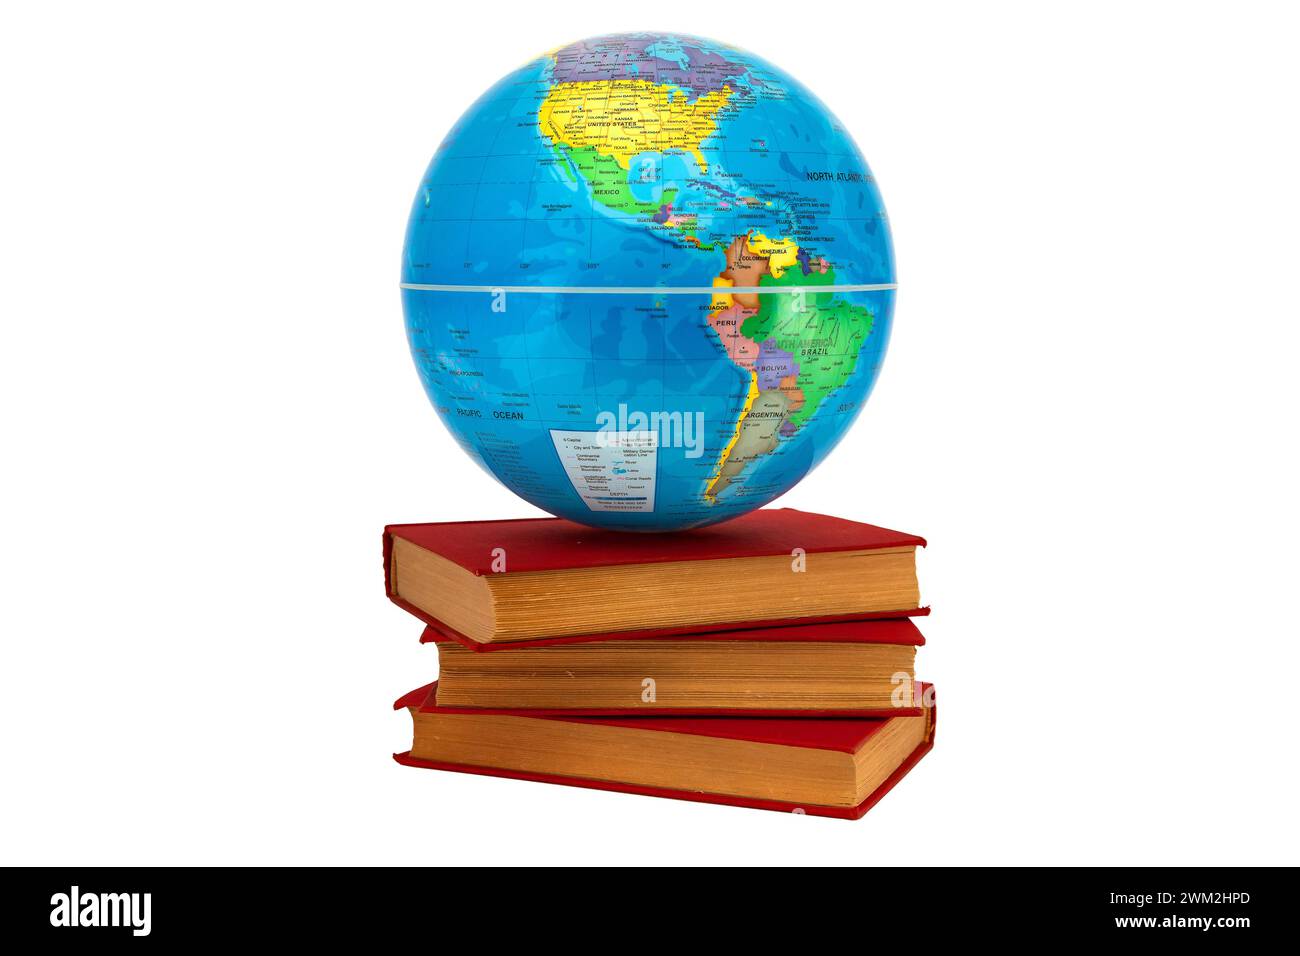 Earth globe on a stack of books where America is seen as a concept of knowledge. Books symbolize wisdom and knowledge that support the world. Stock Photo